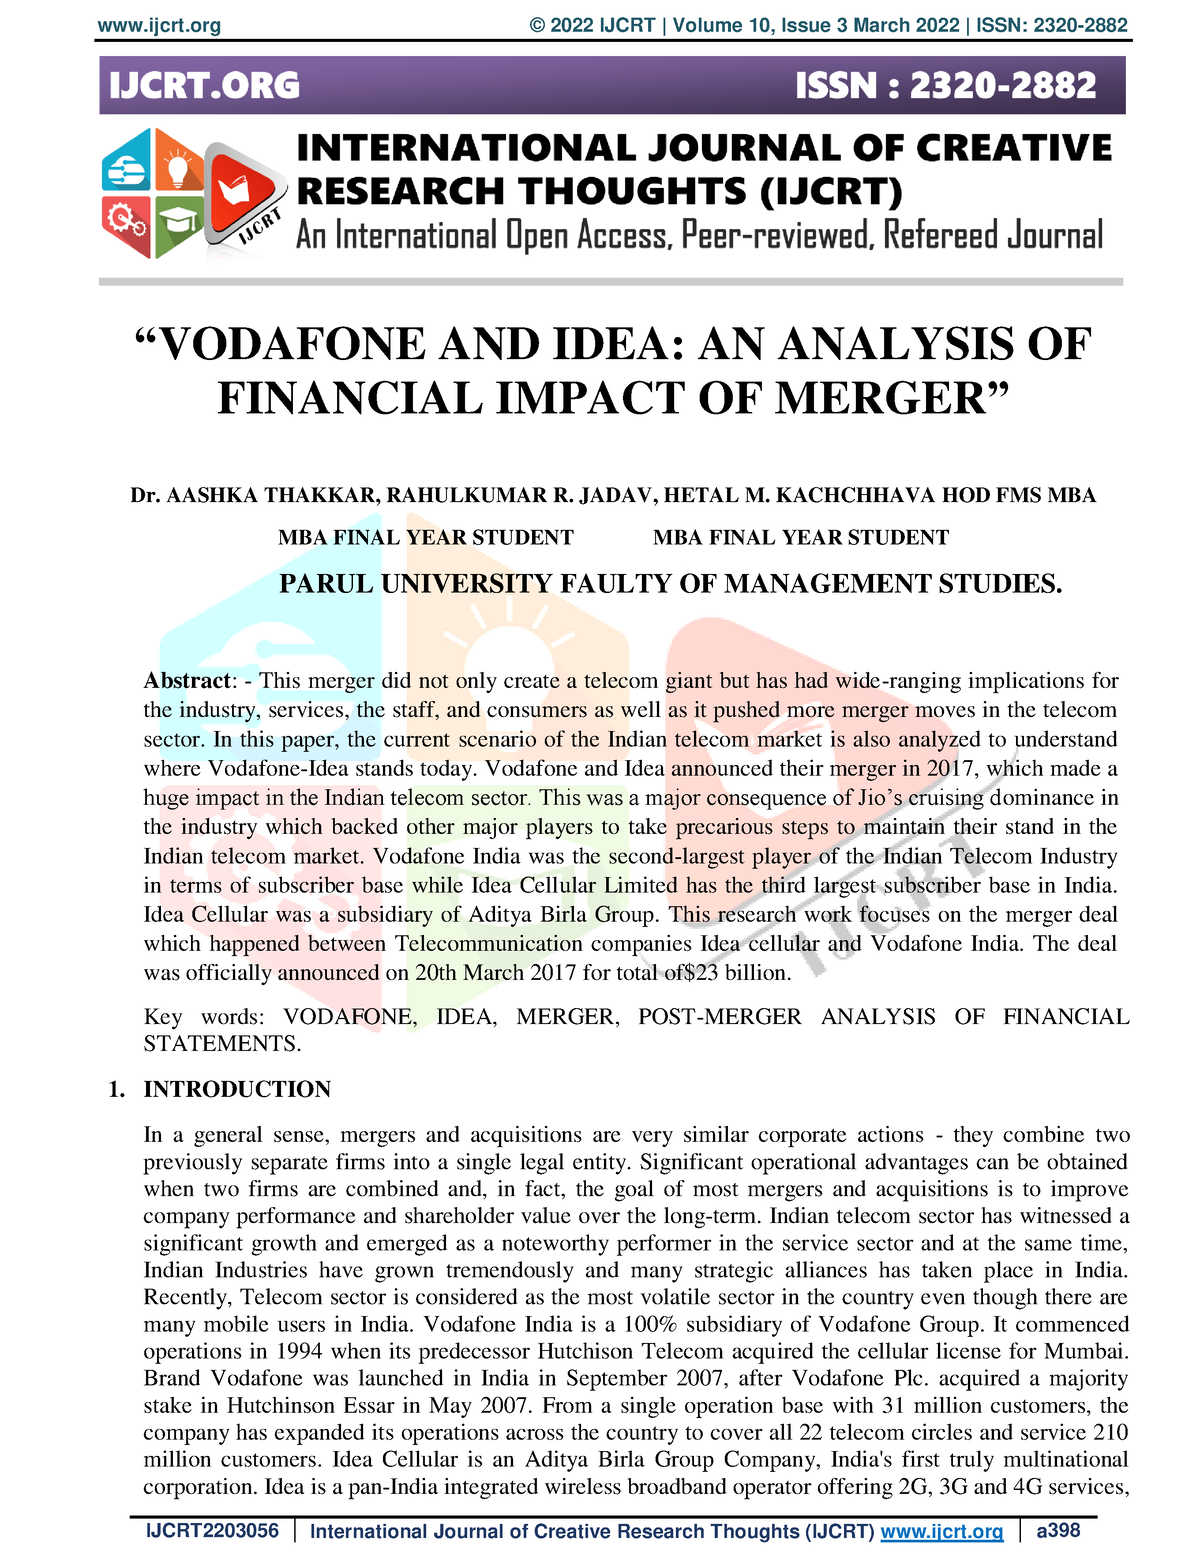 research paper on idea vodafone merger